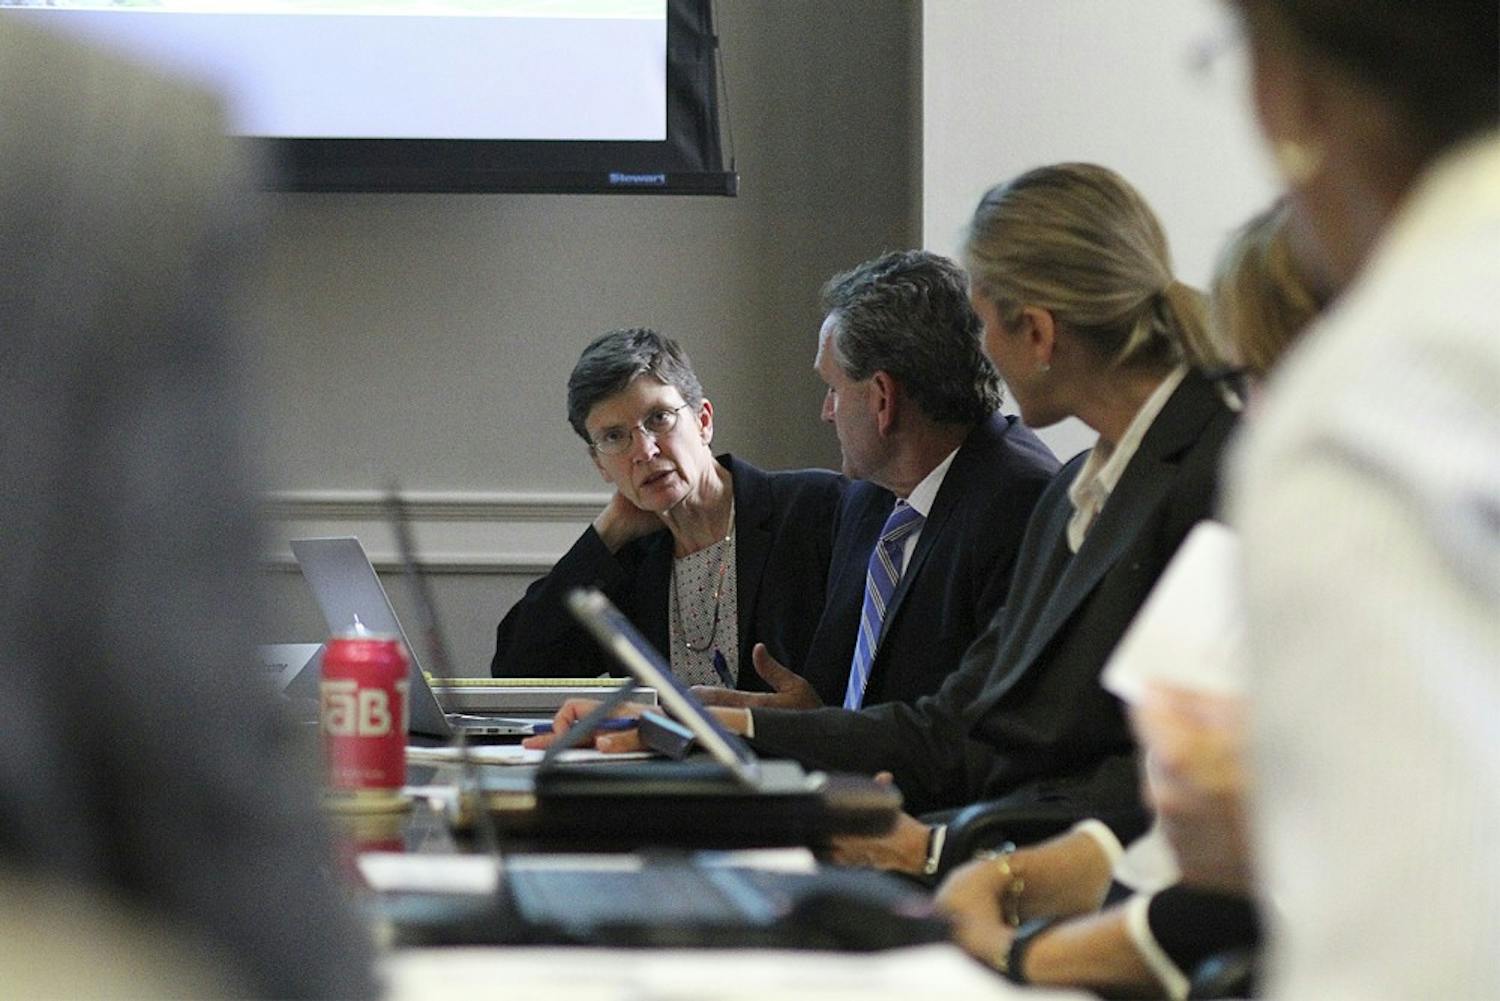 Lissa Broome, the Faculty Athletics Representative to the Atlantic Coast Conference and the NCAA, speaks to the Faculty Athletics Committee Tuesday. (Get more info from article)